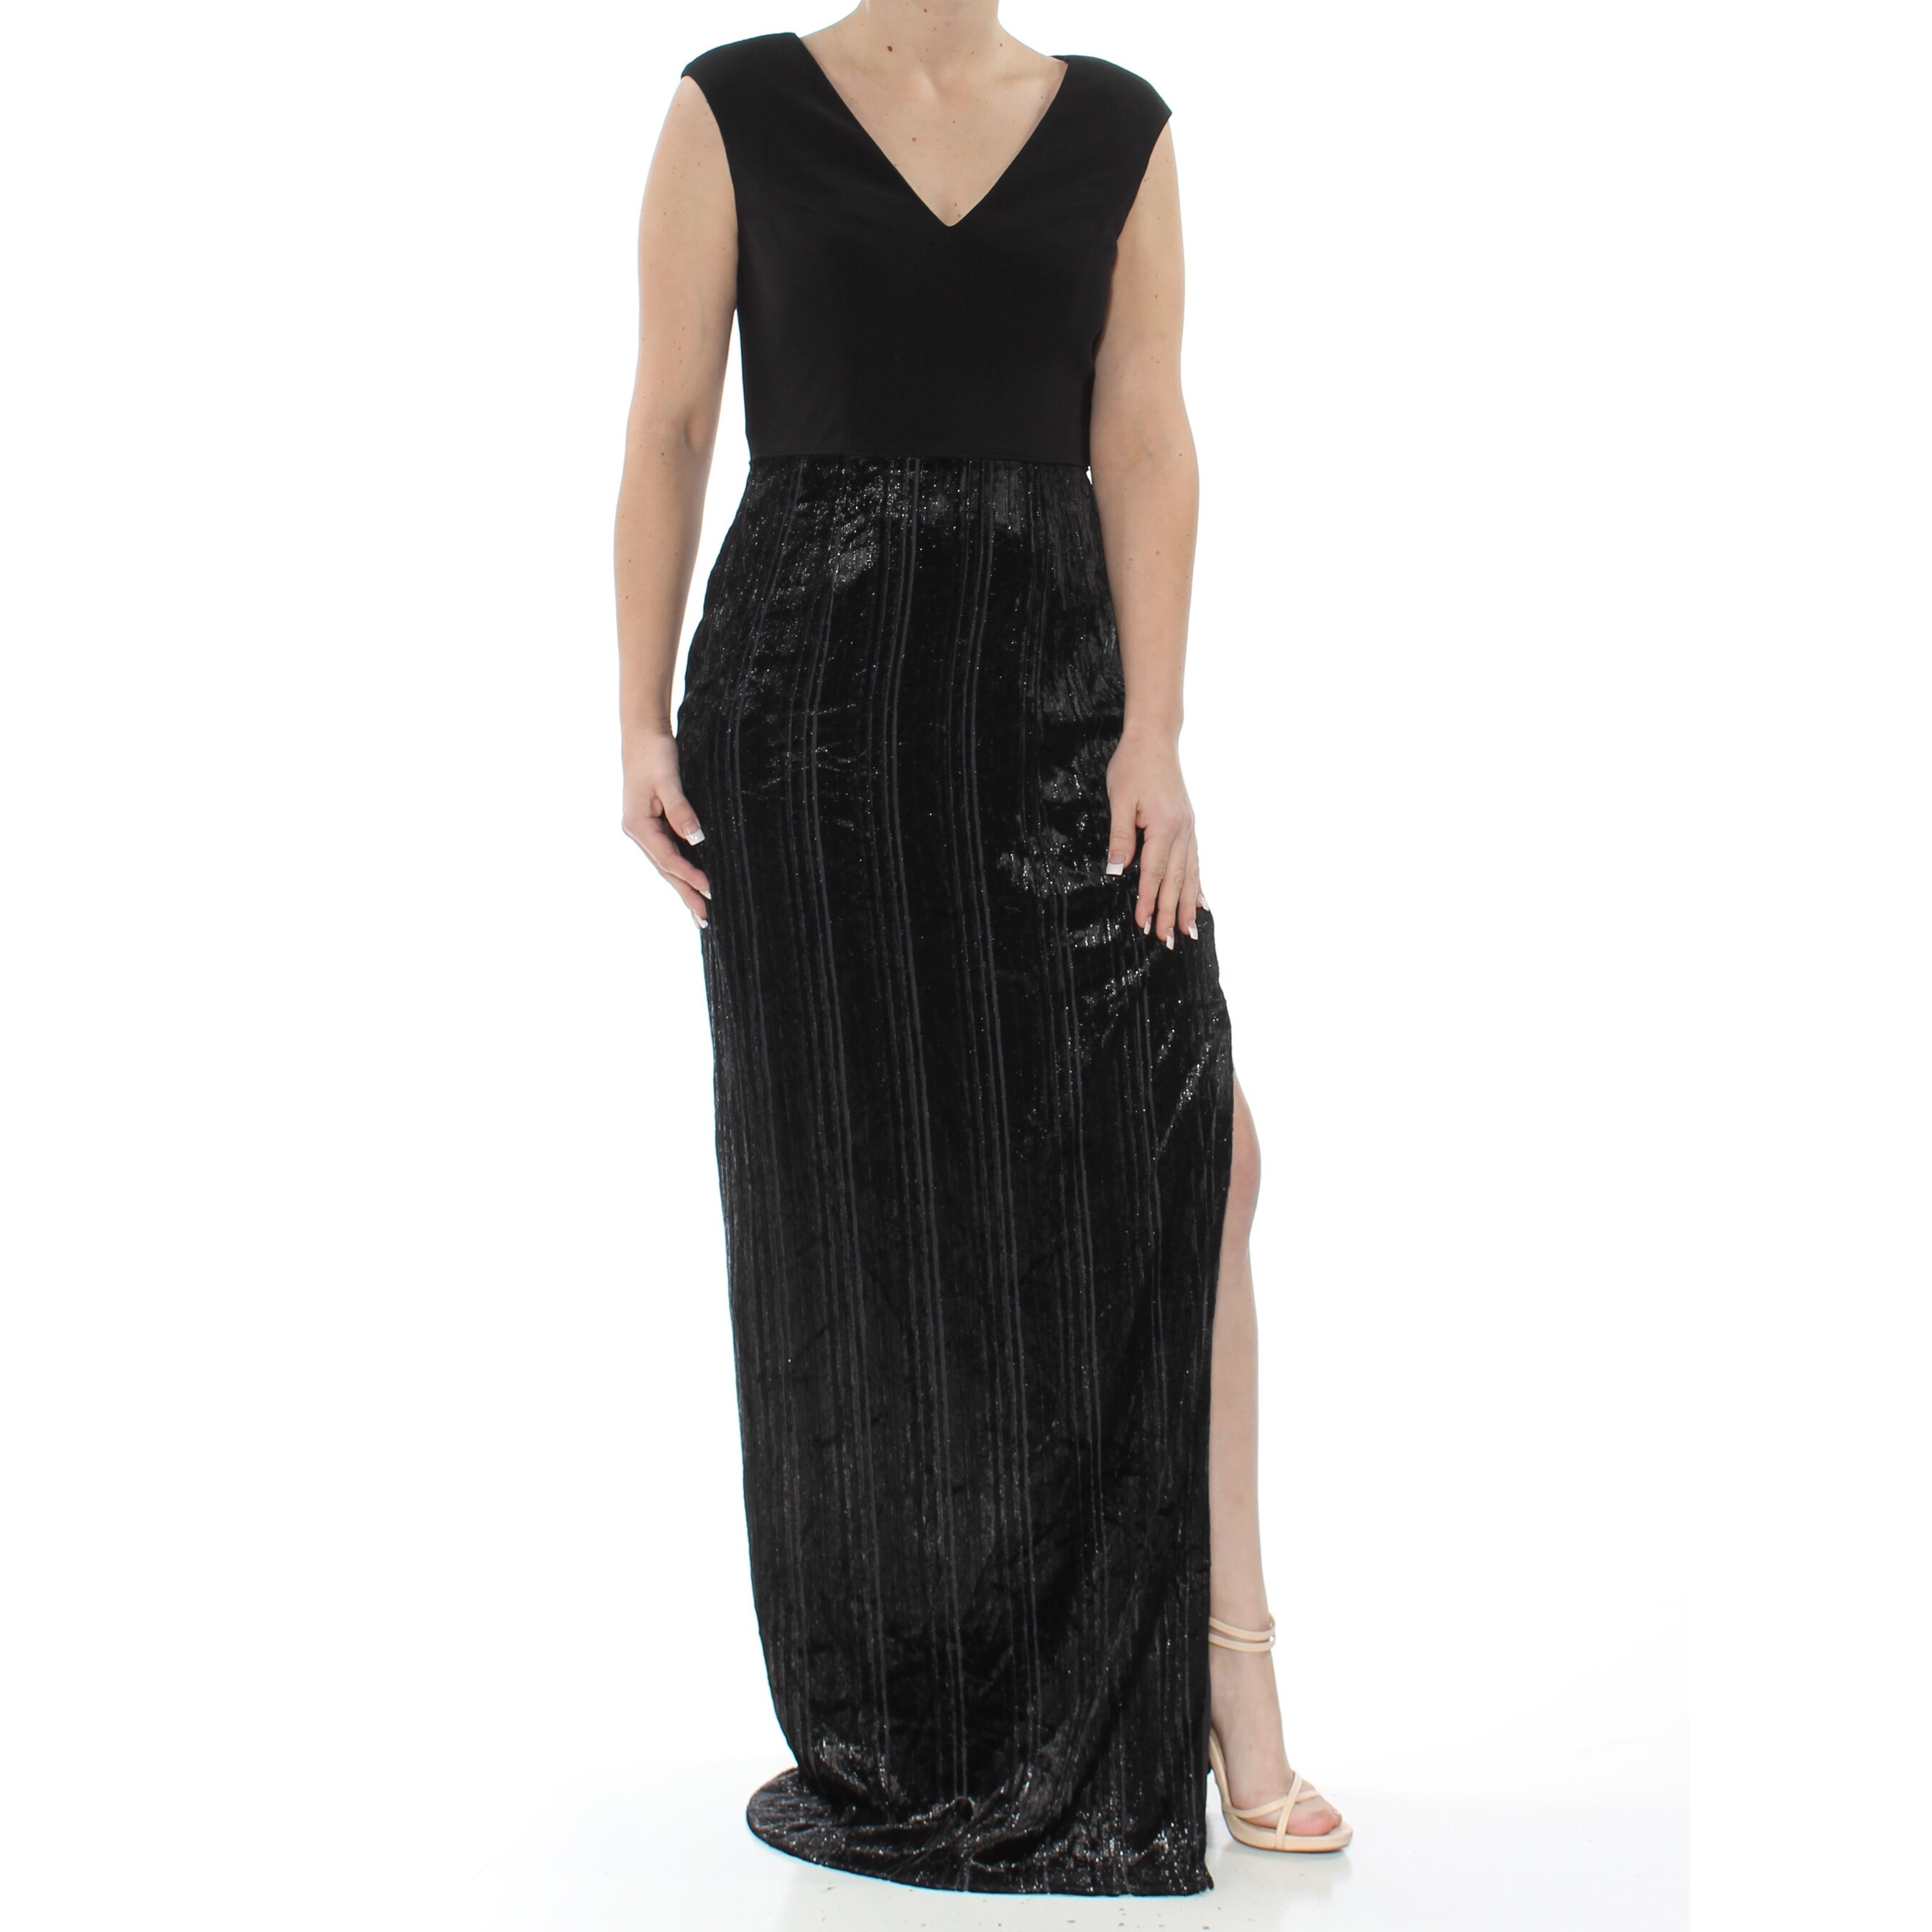 adrianna papell black gown